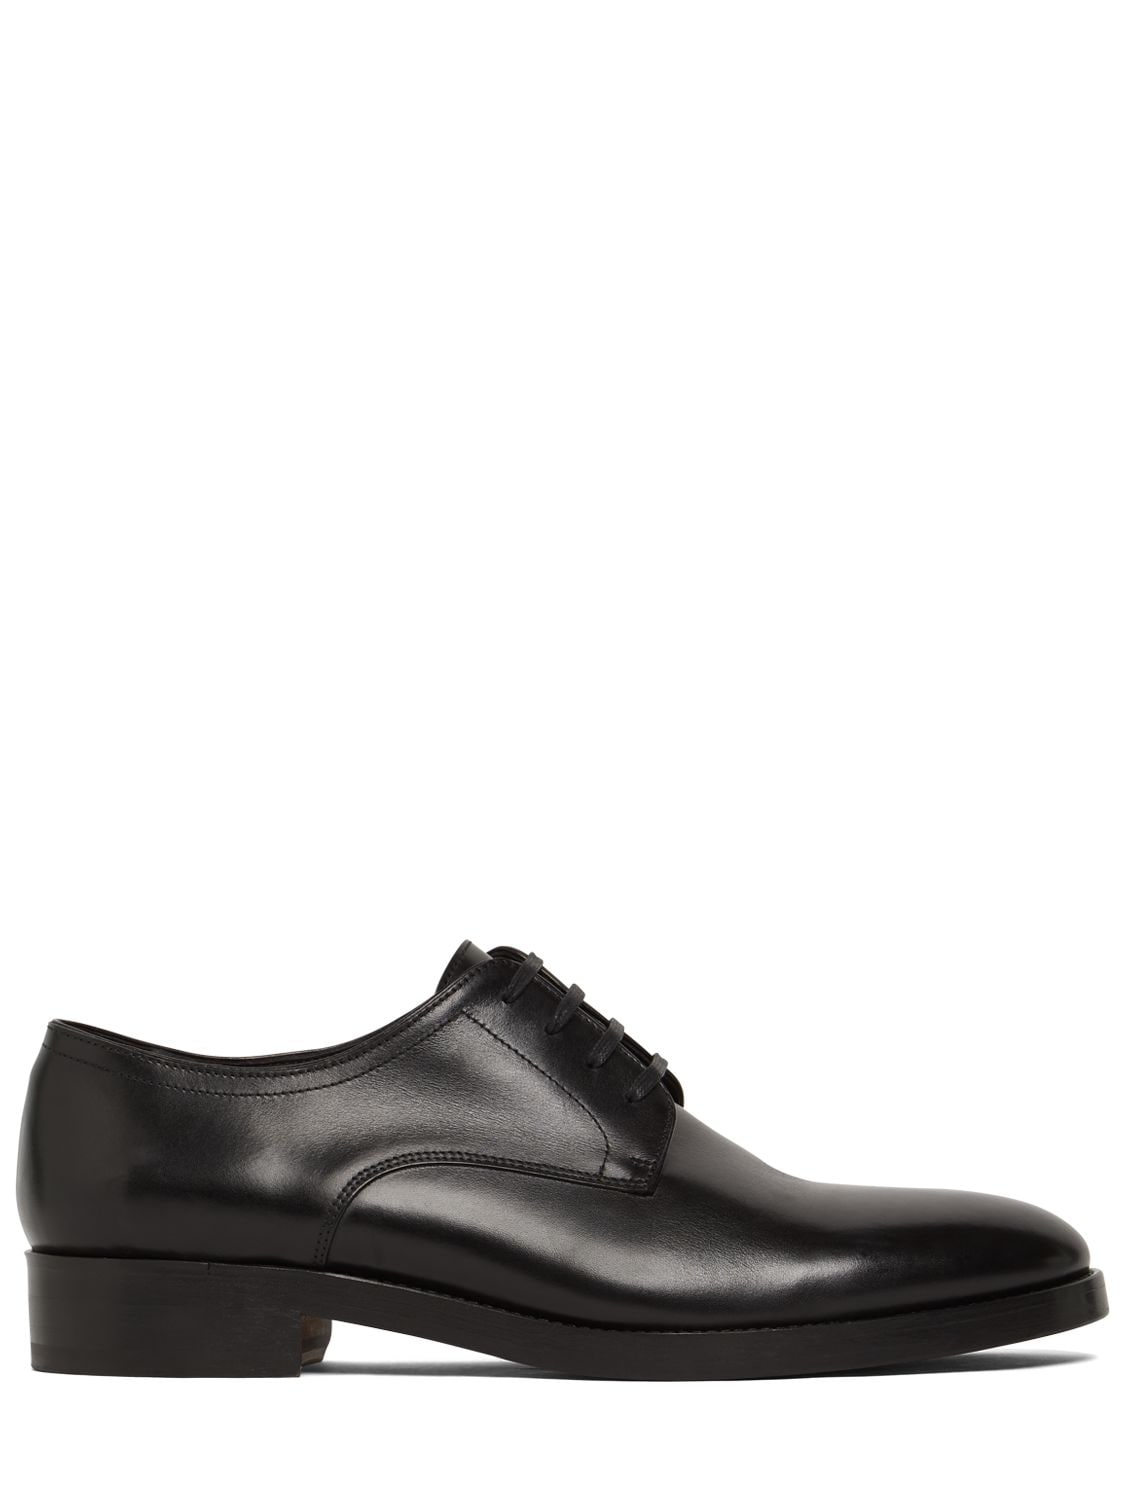 Dsquared2 Bobo Leather Derby Lace Up Shoes In Black | ModeSens